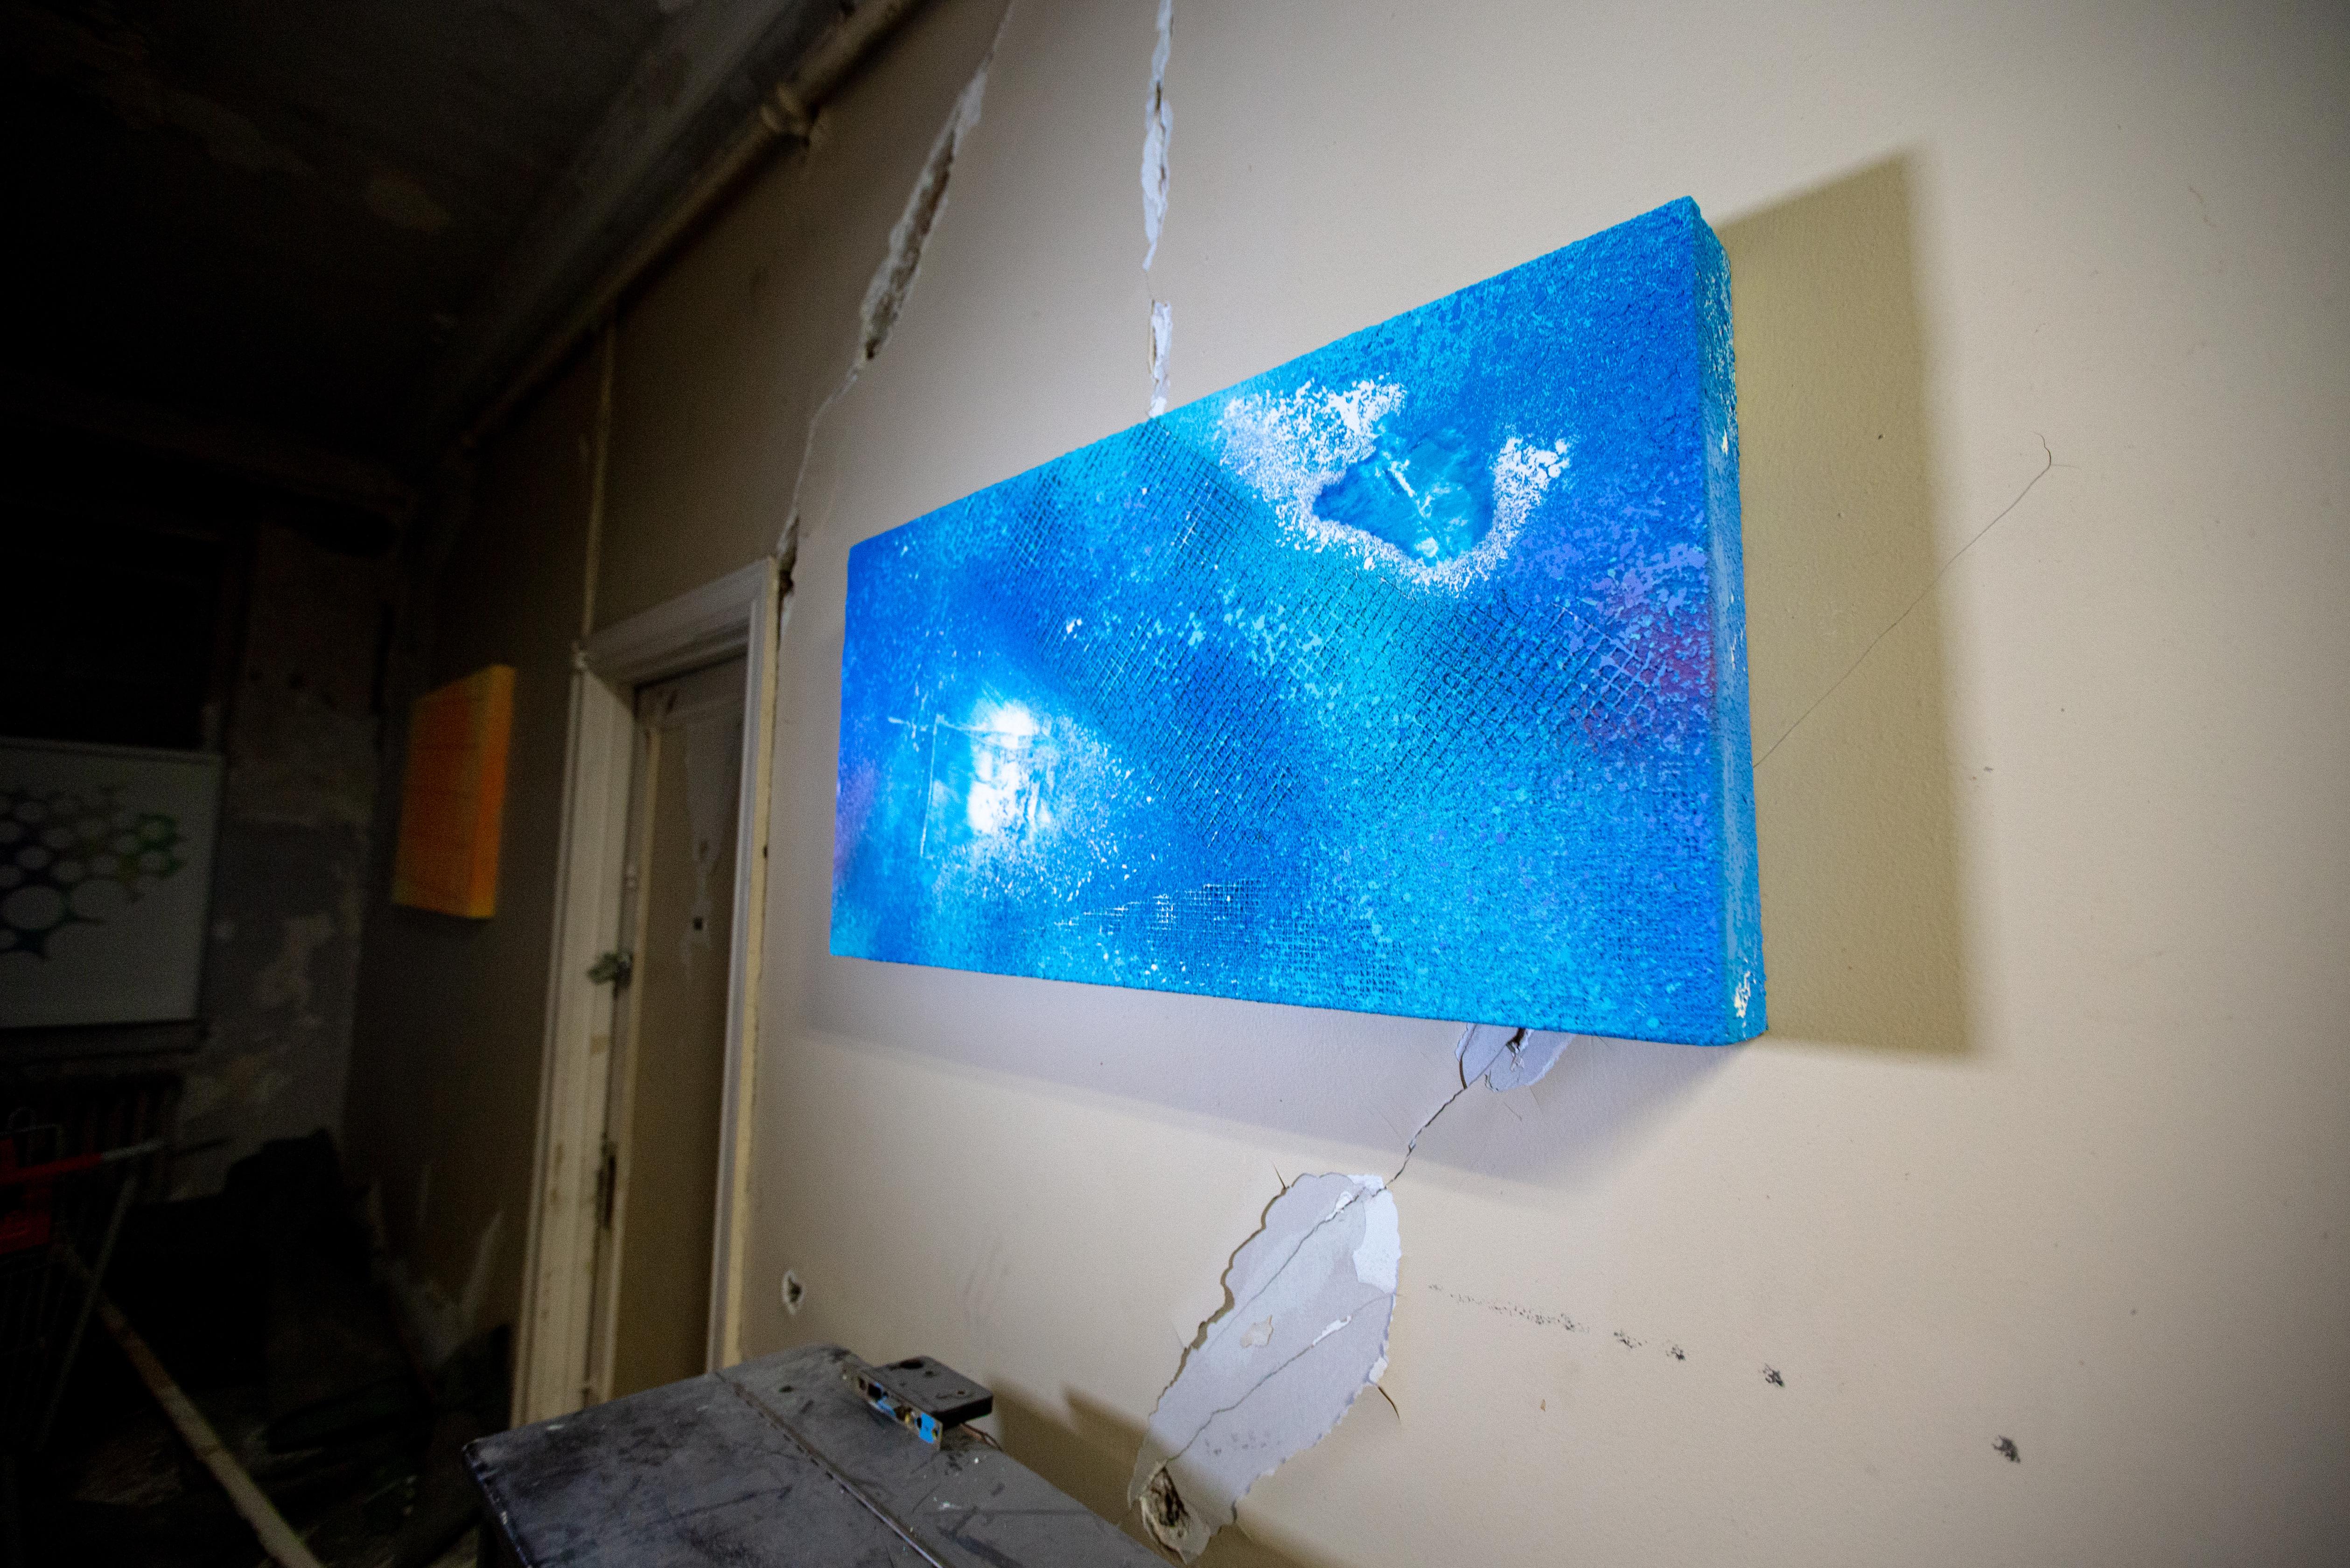 Blue flare, vibrant sky, florescent blue, white and blue mix.
This original piece is a rectangular mixed media painting by Joel Blenz. It is done in multiple materials and shapes to create different textures and illusions. The piece is mostly in